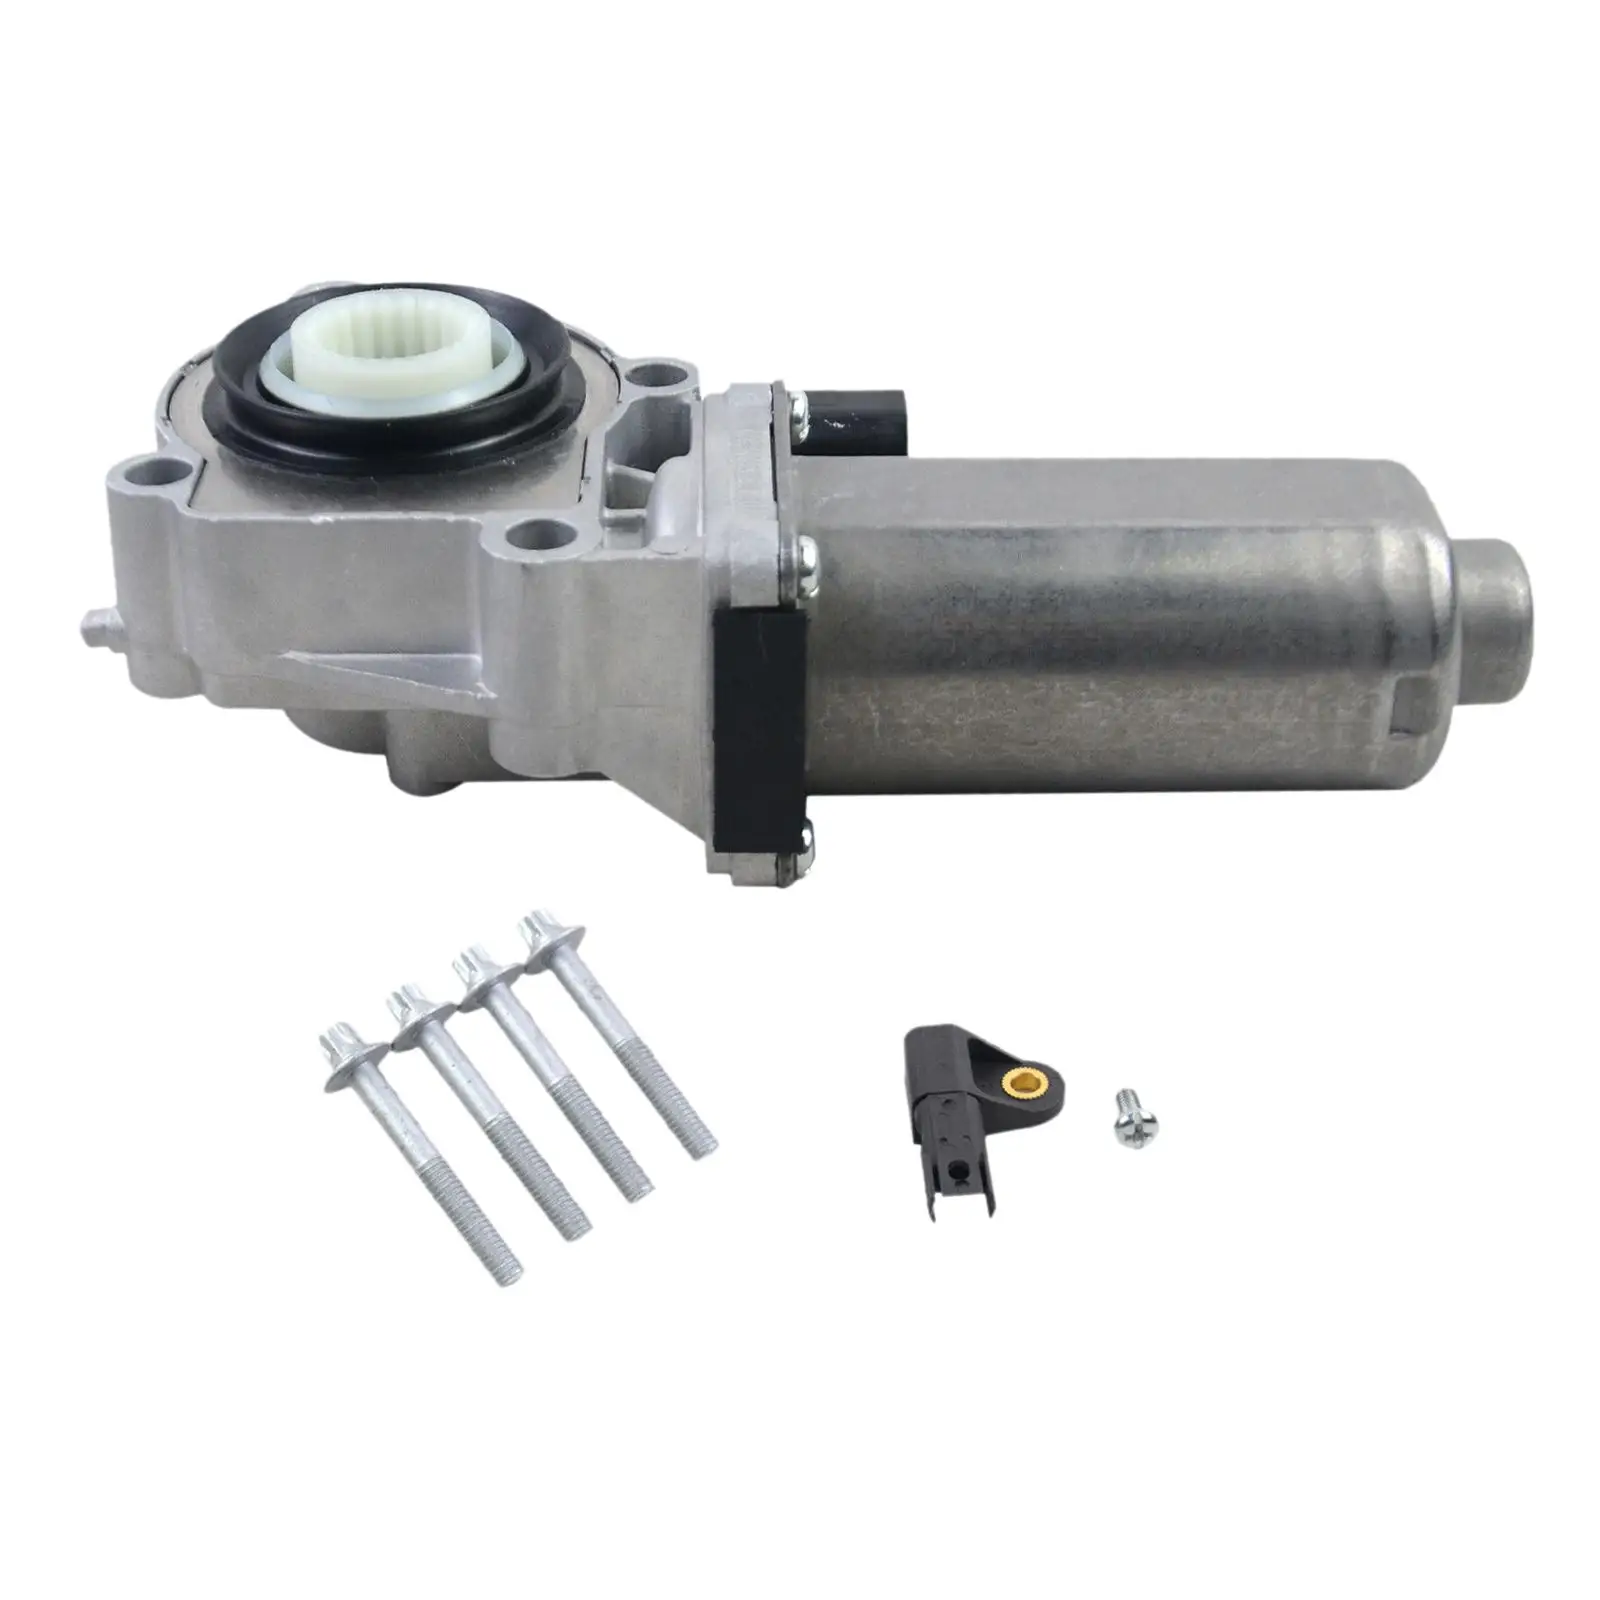 Transfer Case Actuator Shift Motor 27107555295 27103455132 27103455139 27107566296 27107535869 27107599890 for BMW x3 x5